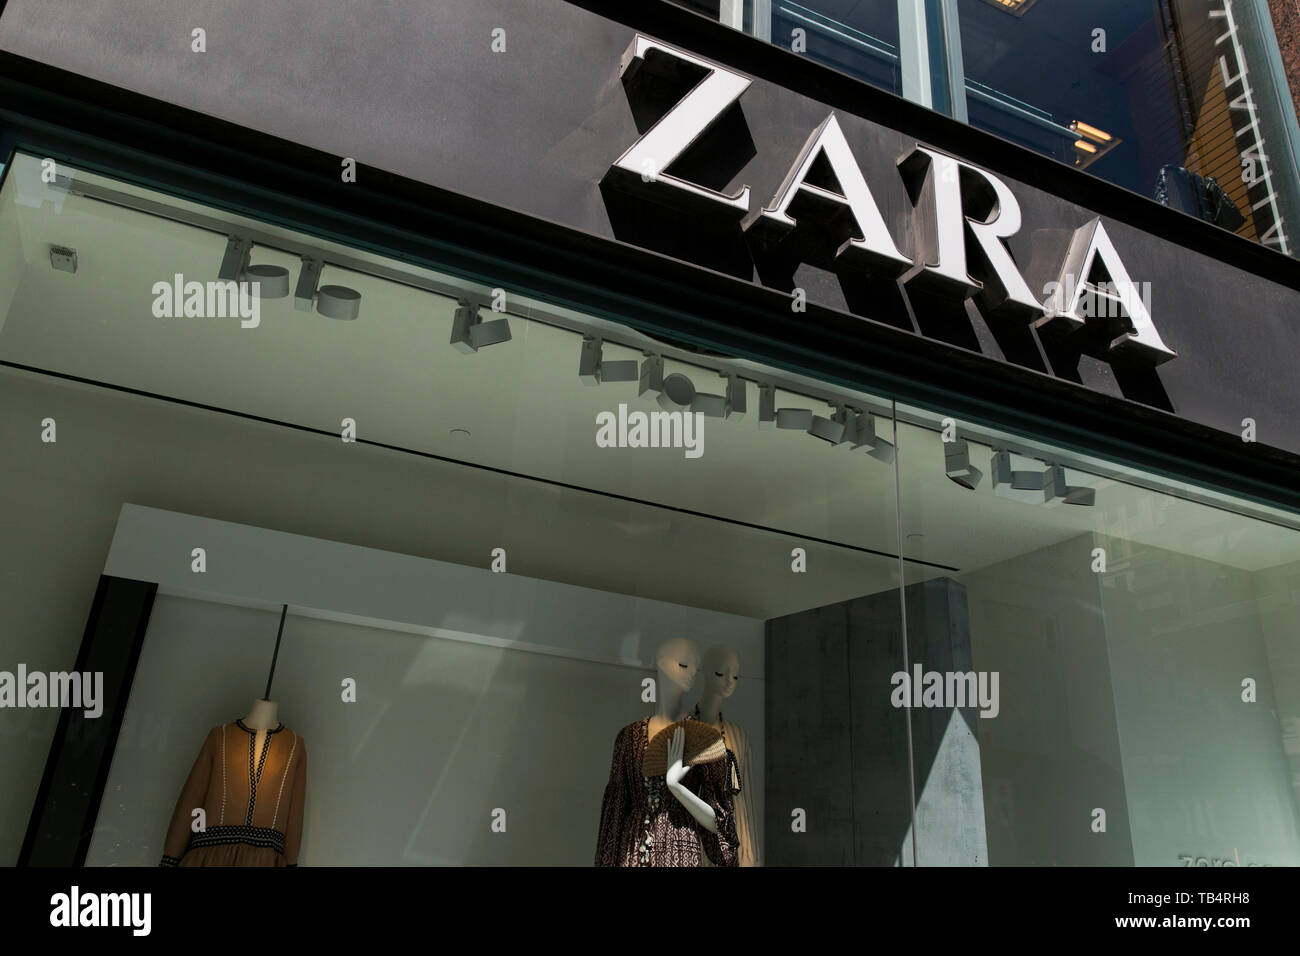 zara montreal hours, clearance Save 68% available -  universo.mobonline.com.br